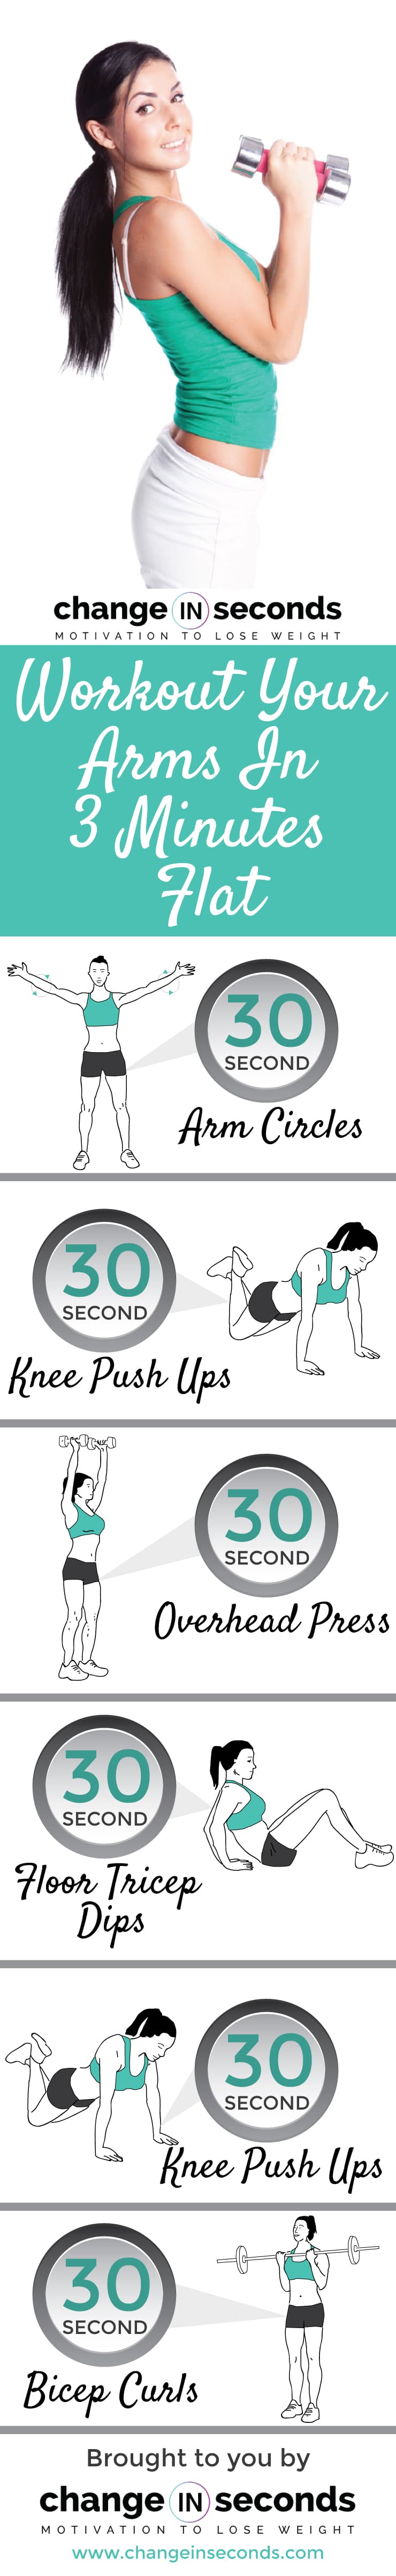 Workout Your Arms In 3 Minutes Flat